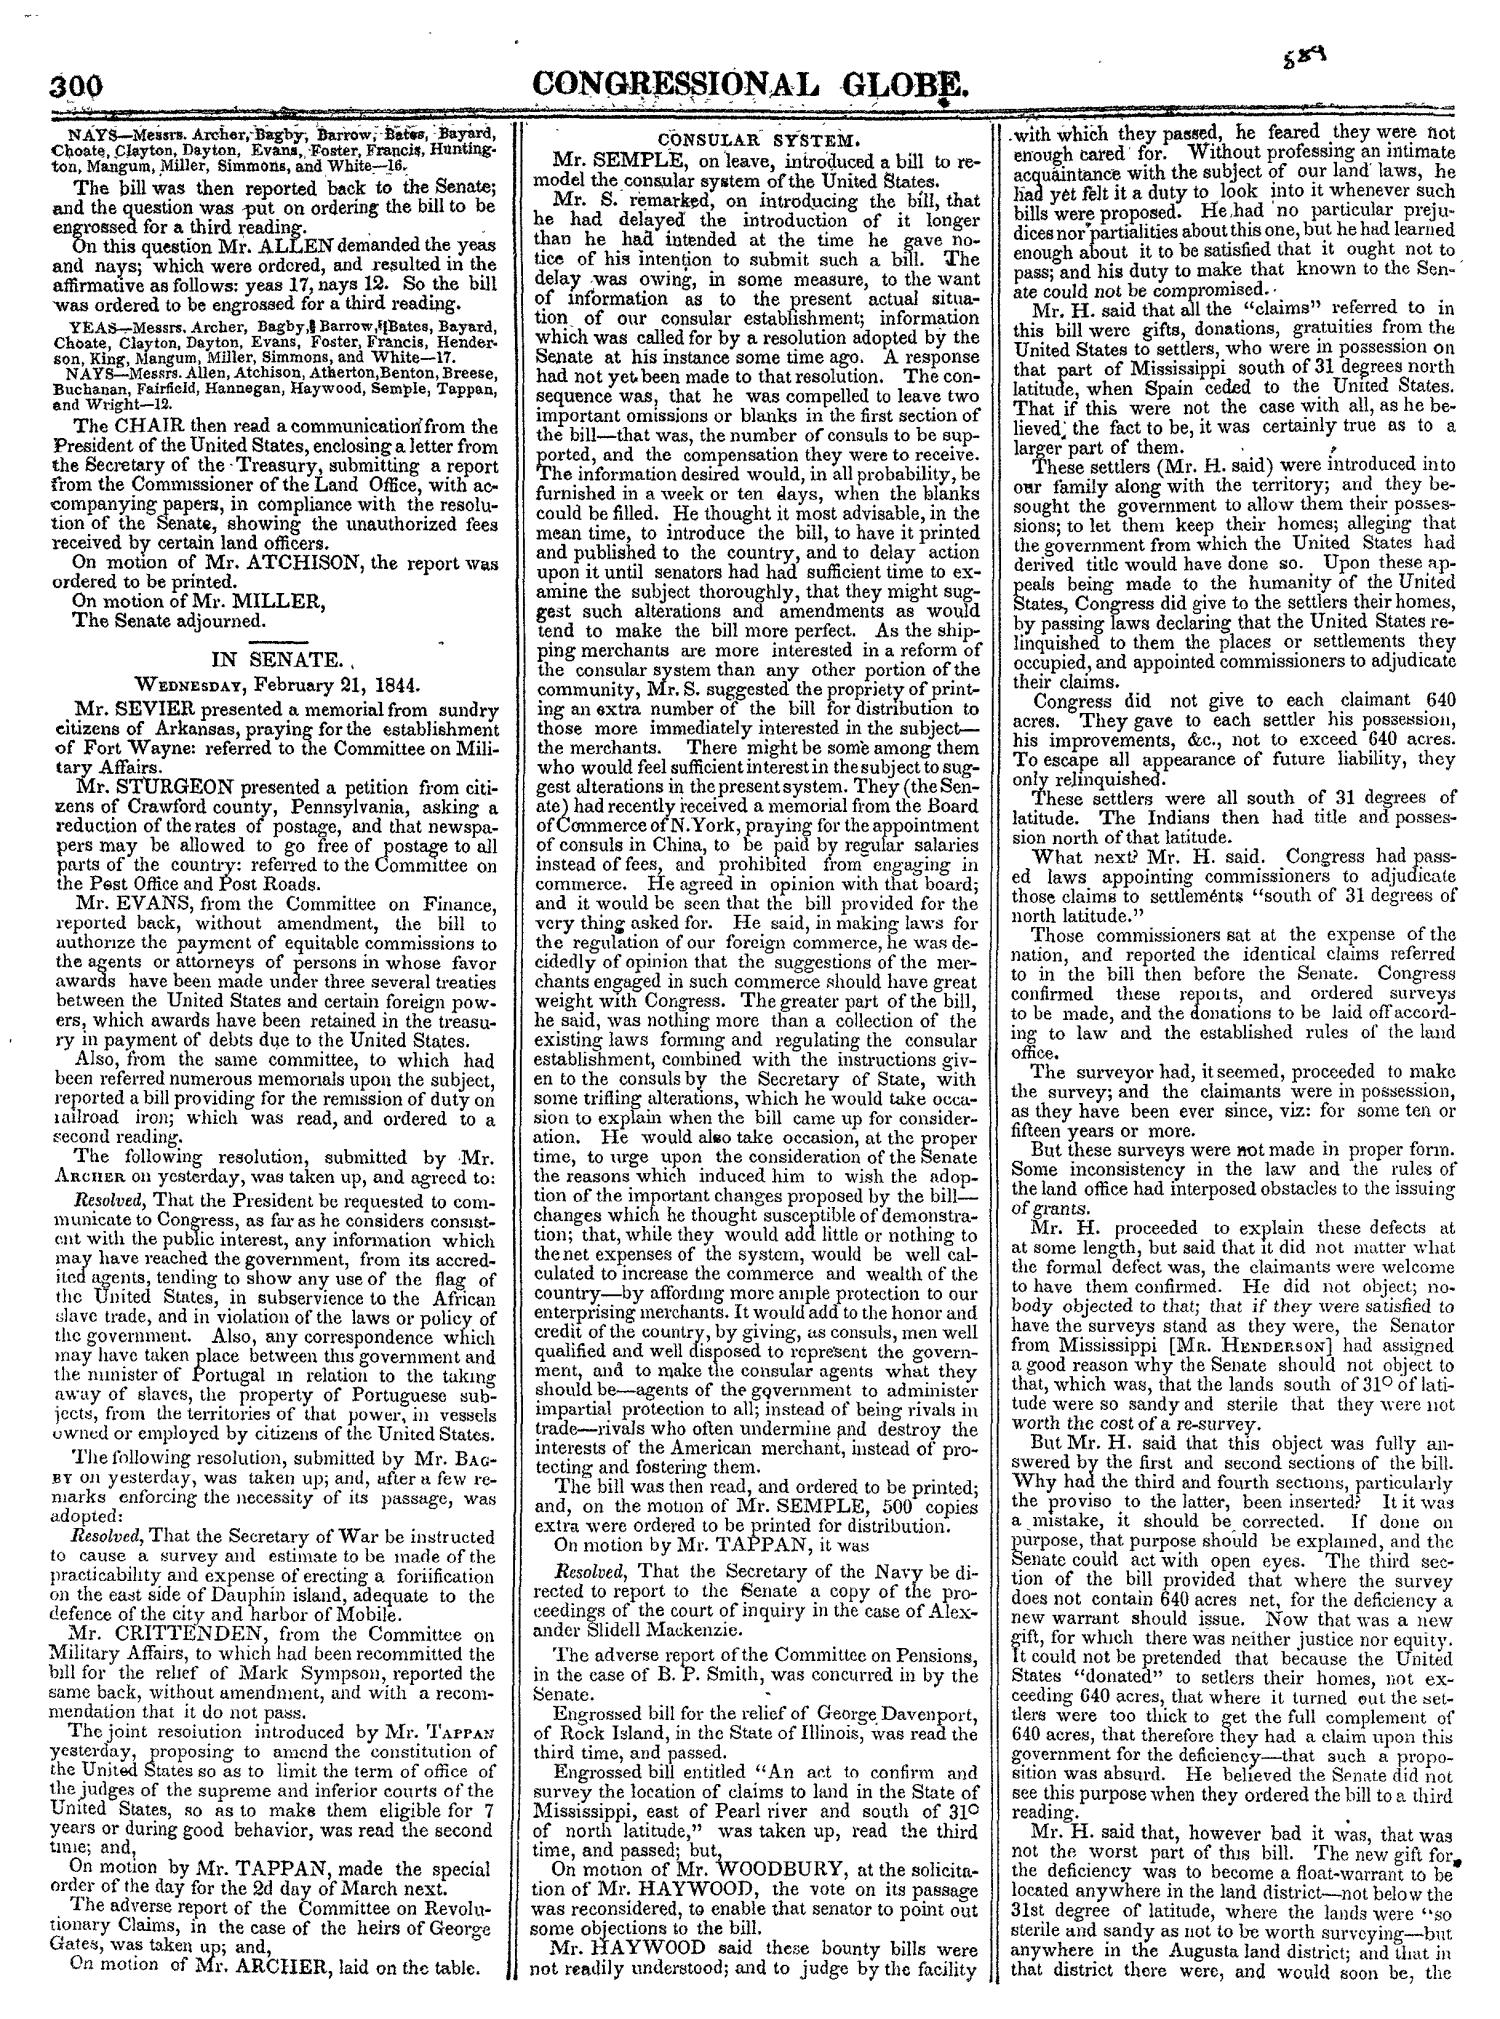 The Congressional Globe, Volume 13, Part 1: Twenty-Eighth Congress, First Session
                                                
                                                    300
                                                